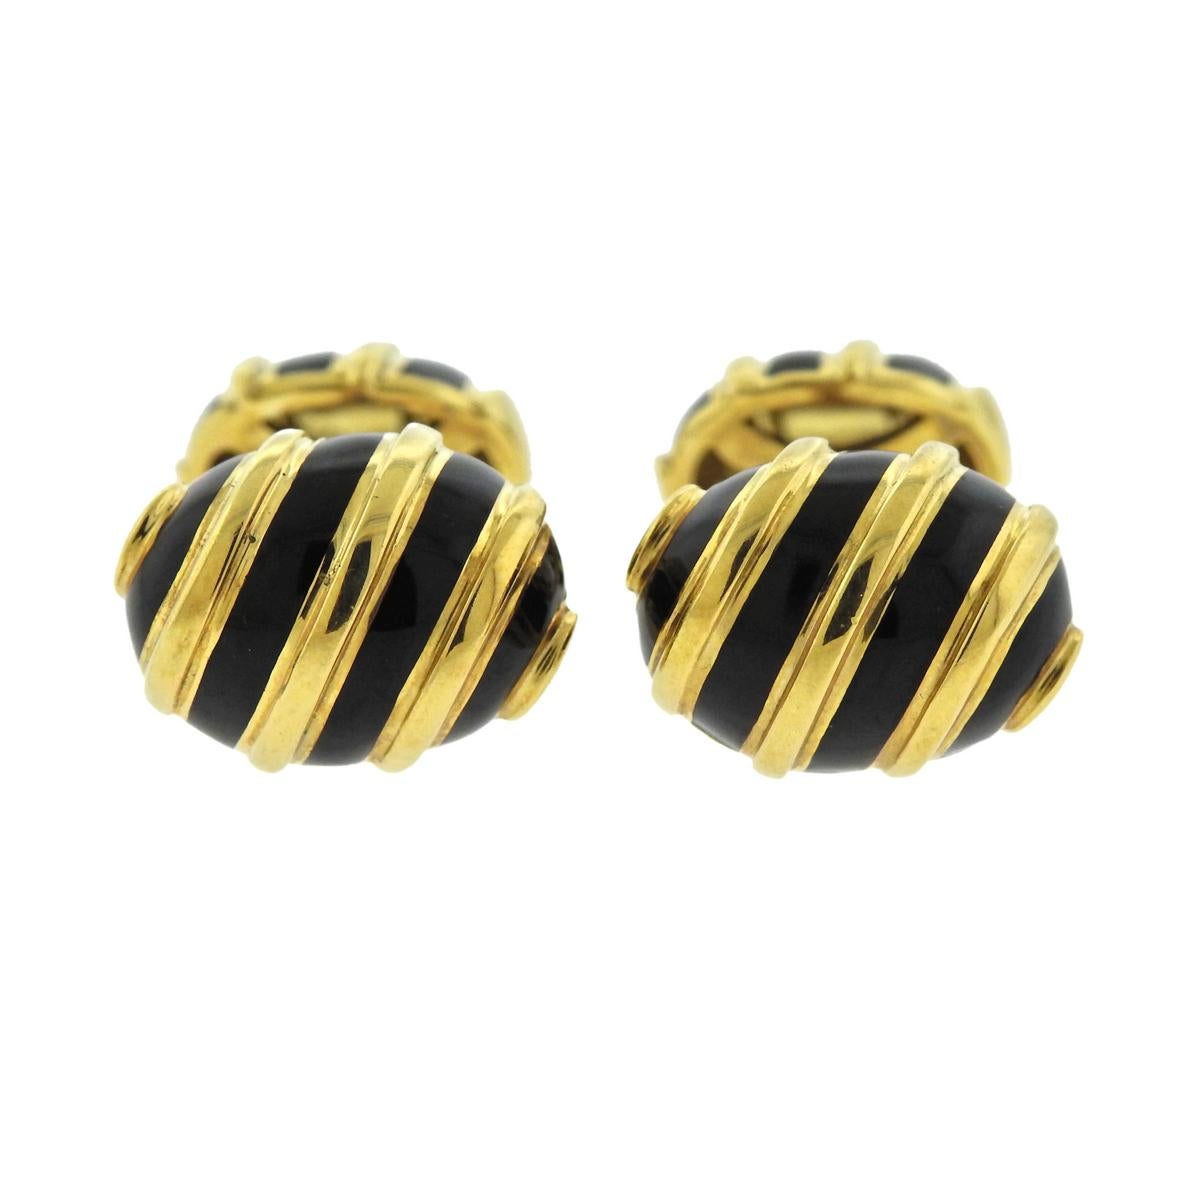 Pair of 18k yellow gold cufflinks, crafted by Jean Schlumberger for Tiffany & C, decorated with black enamel. Cufflink top is 15mm x 11mm, weigh 16.7 grams. Marked: 750, Schlumberger, Tiffany & Co.